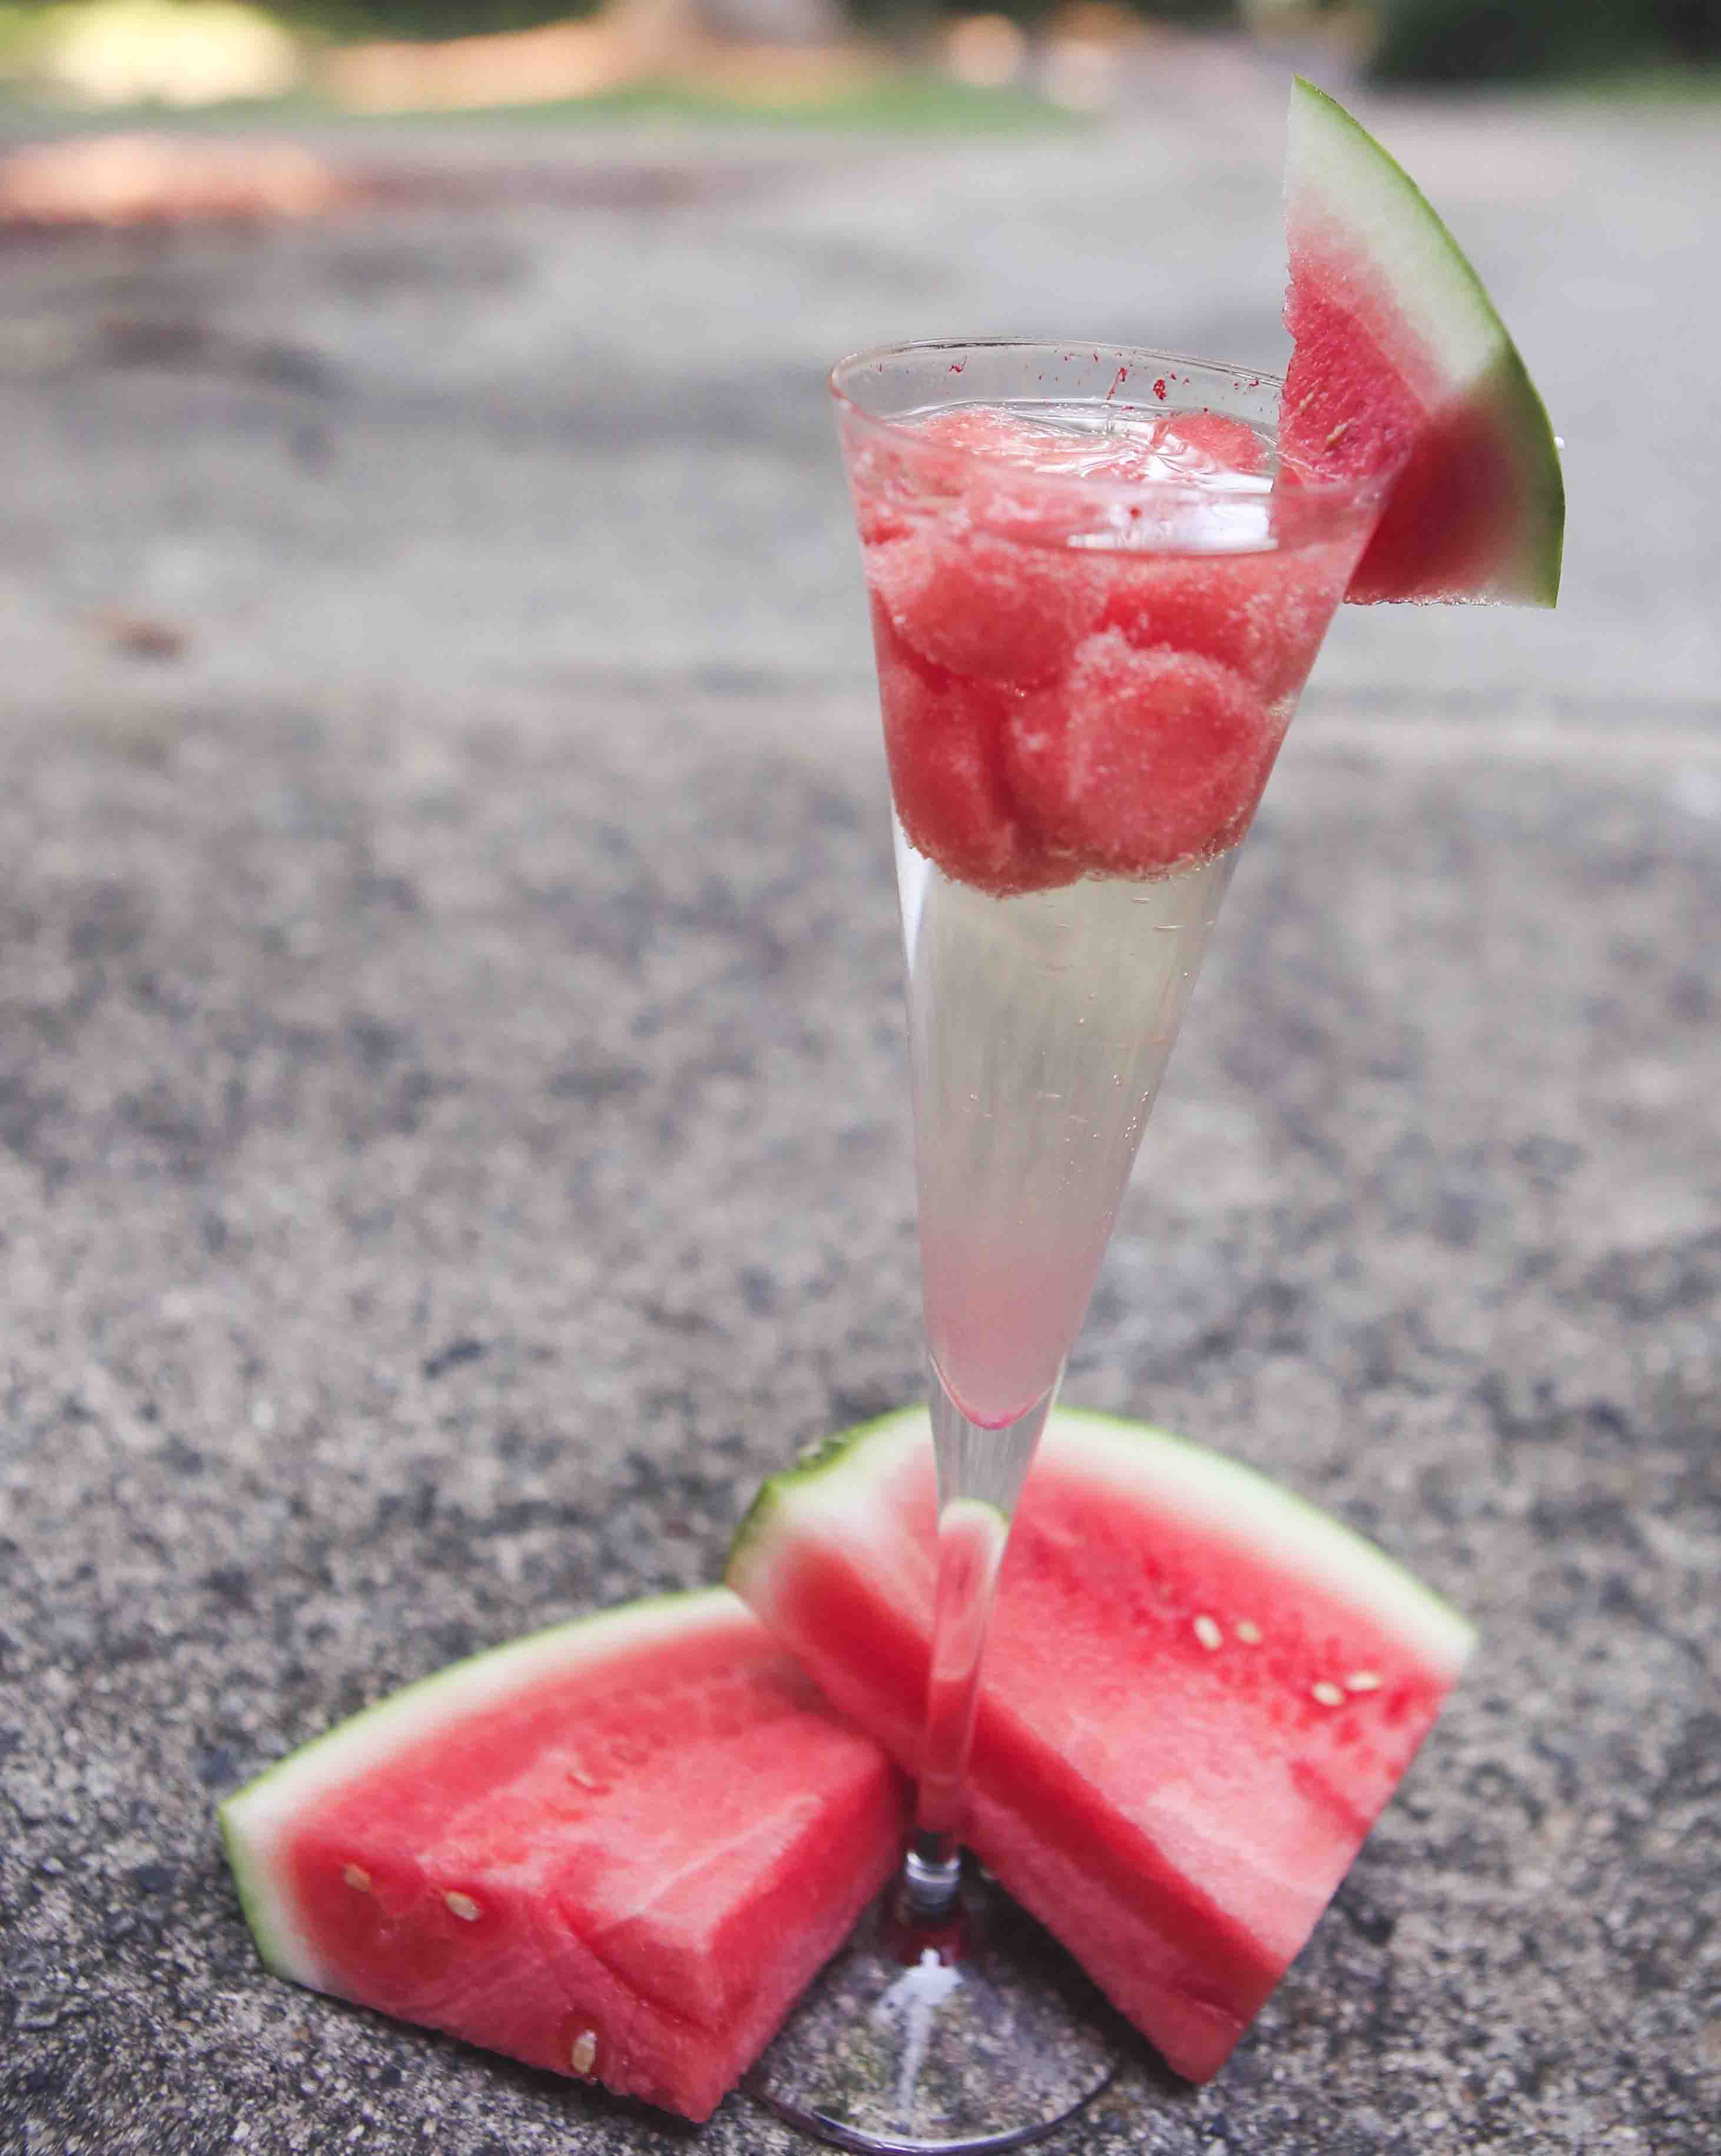 The Best Watermelon Cocktail Recipe : The Refreshing Watermelon Fizz by Atlanta blogger 